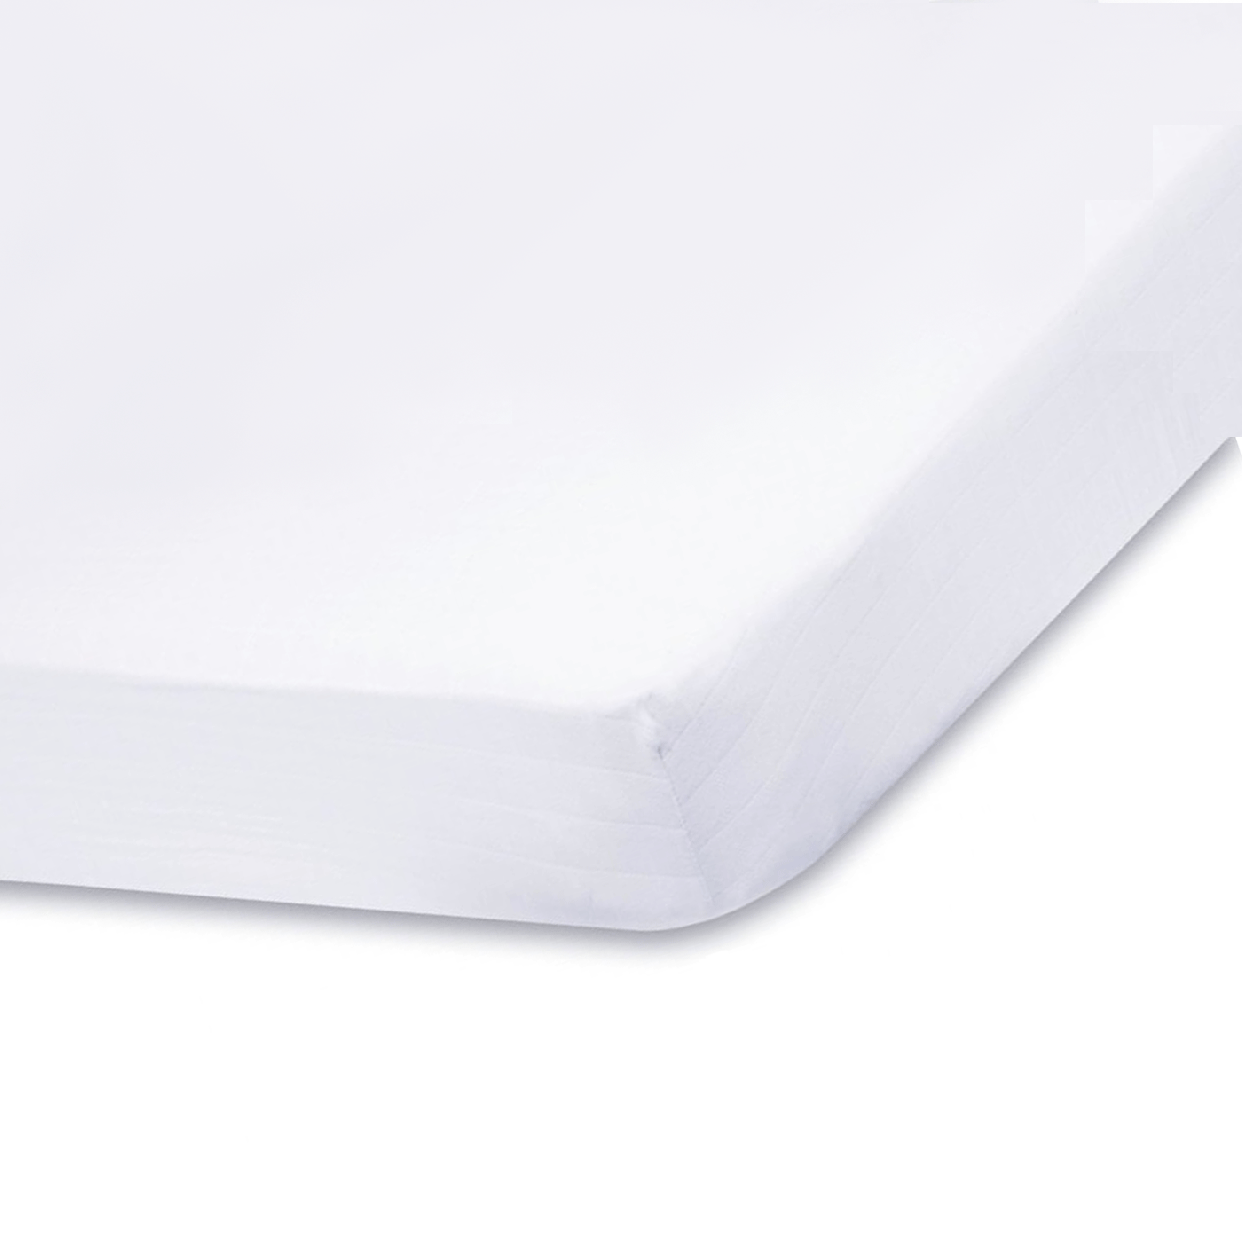 2 Pack Cot Sheets 100% Cotton Jersey - White, 60x120 cm>